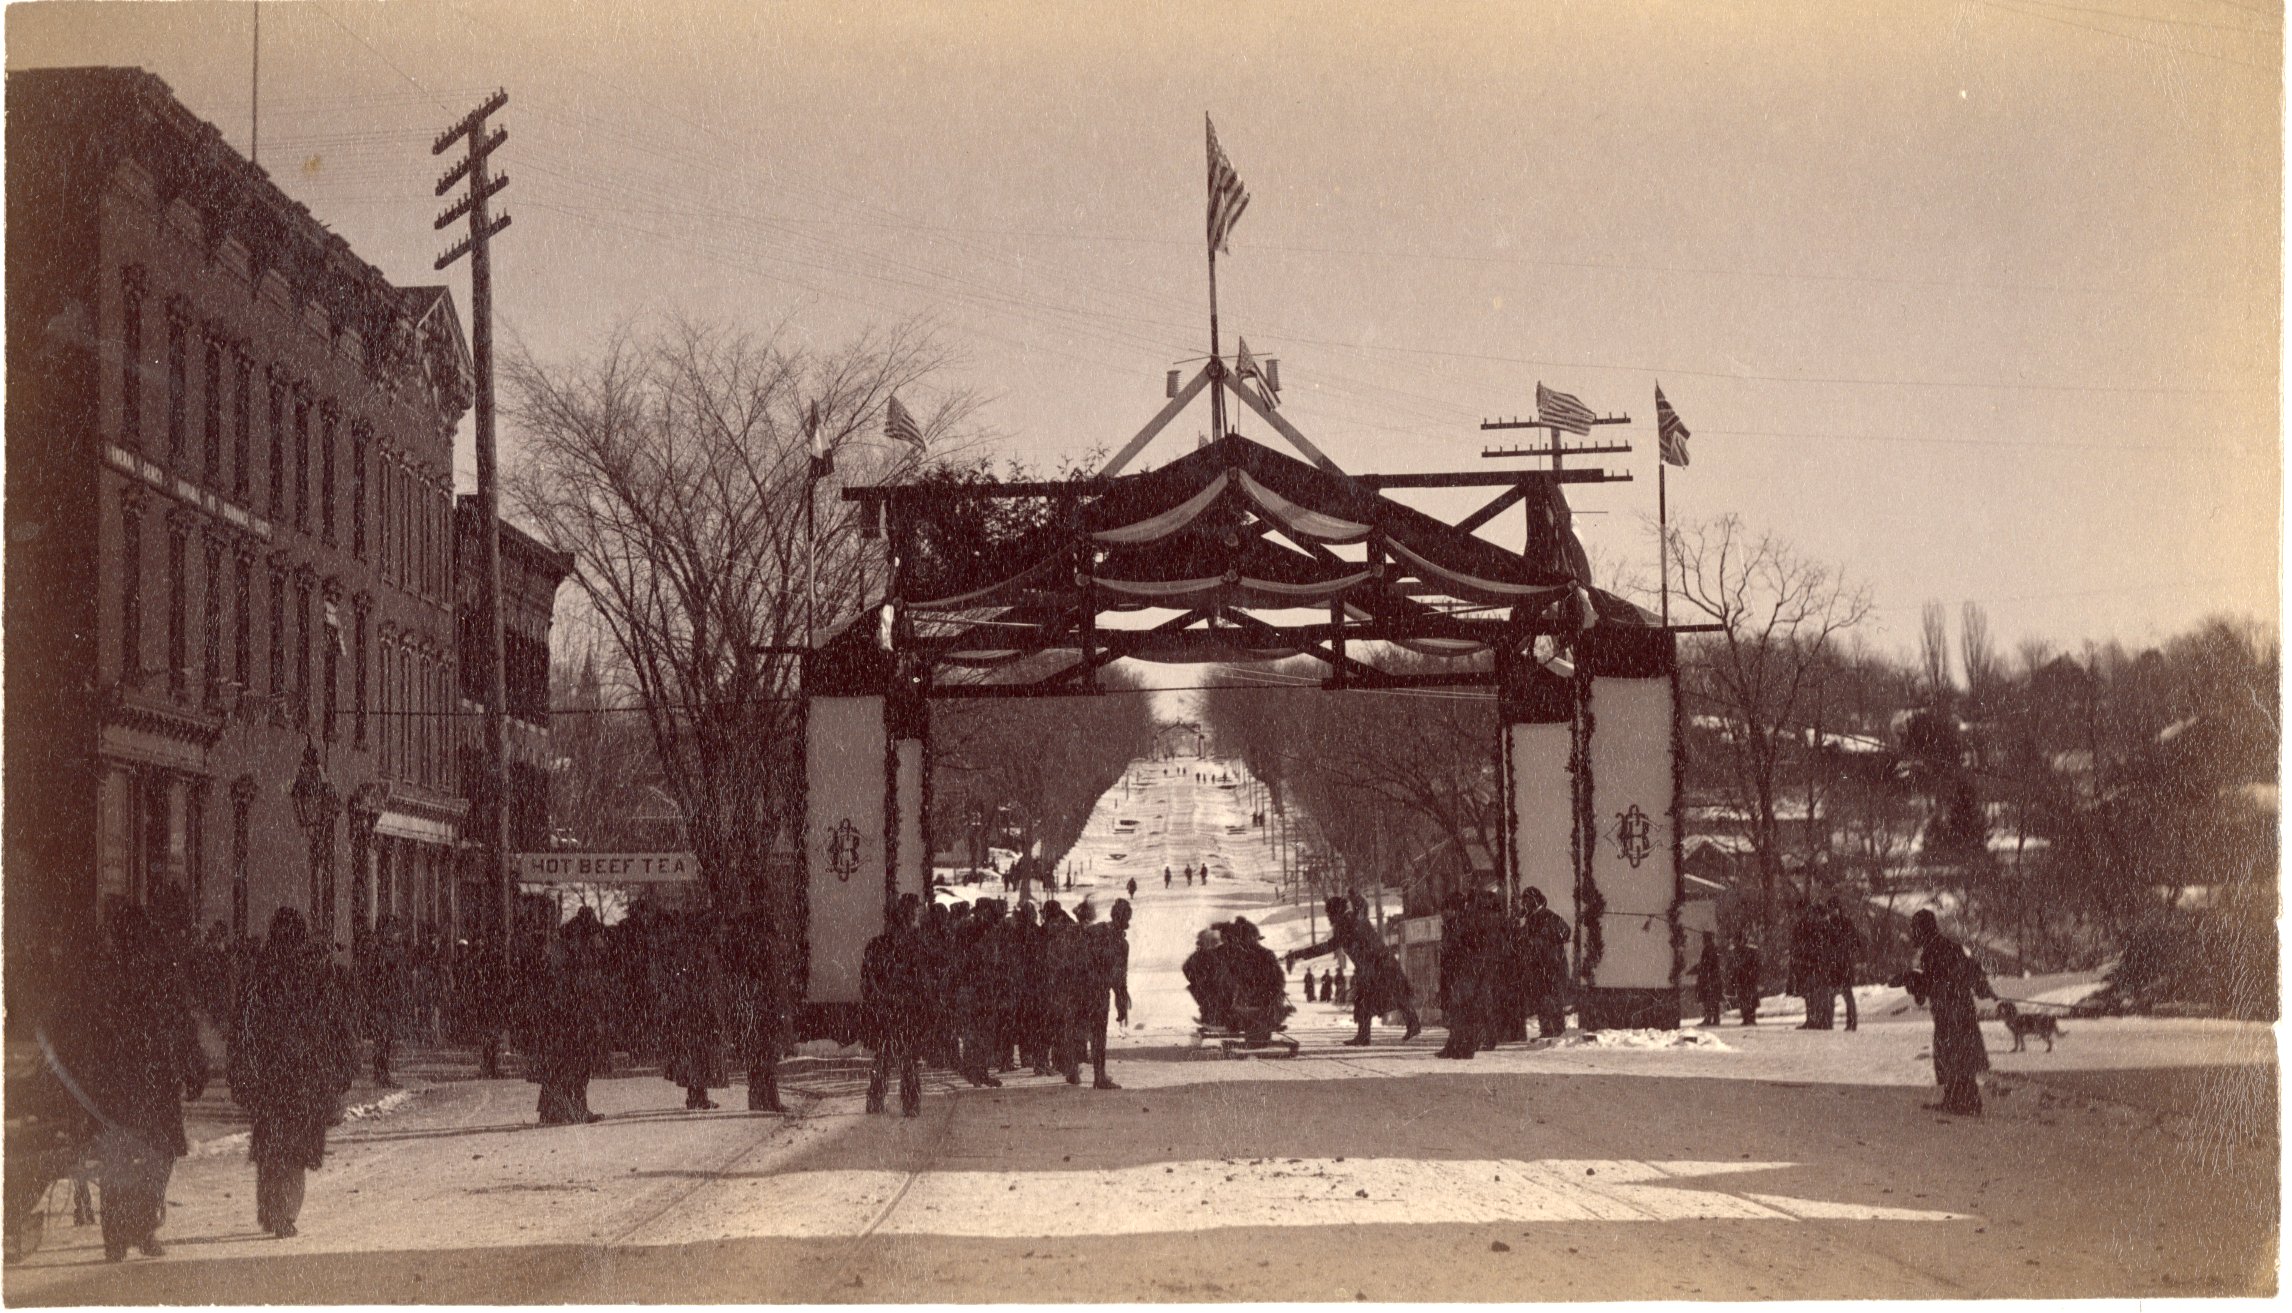 Phot shows the Main Street coasting hill, a traverse sled about to cross under the Coasting Club arch where spectators are gathered..